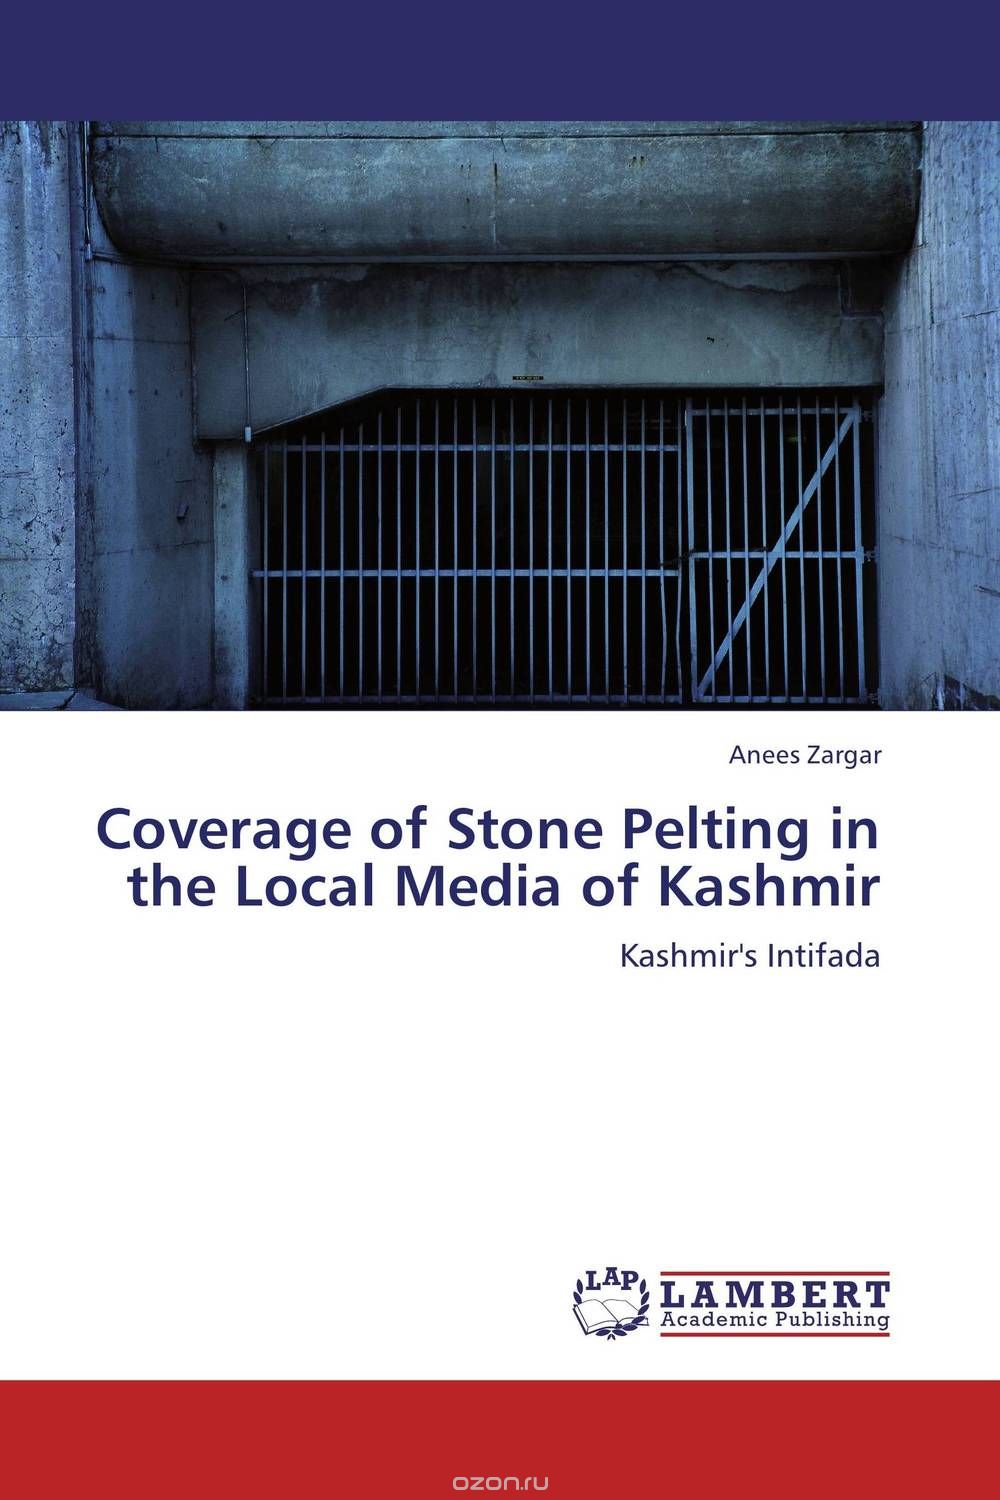 Coverage of Stone Pelting in the Local Media of Kashmir